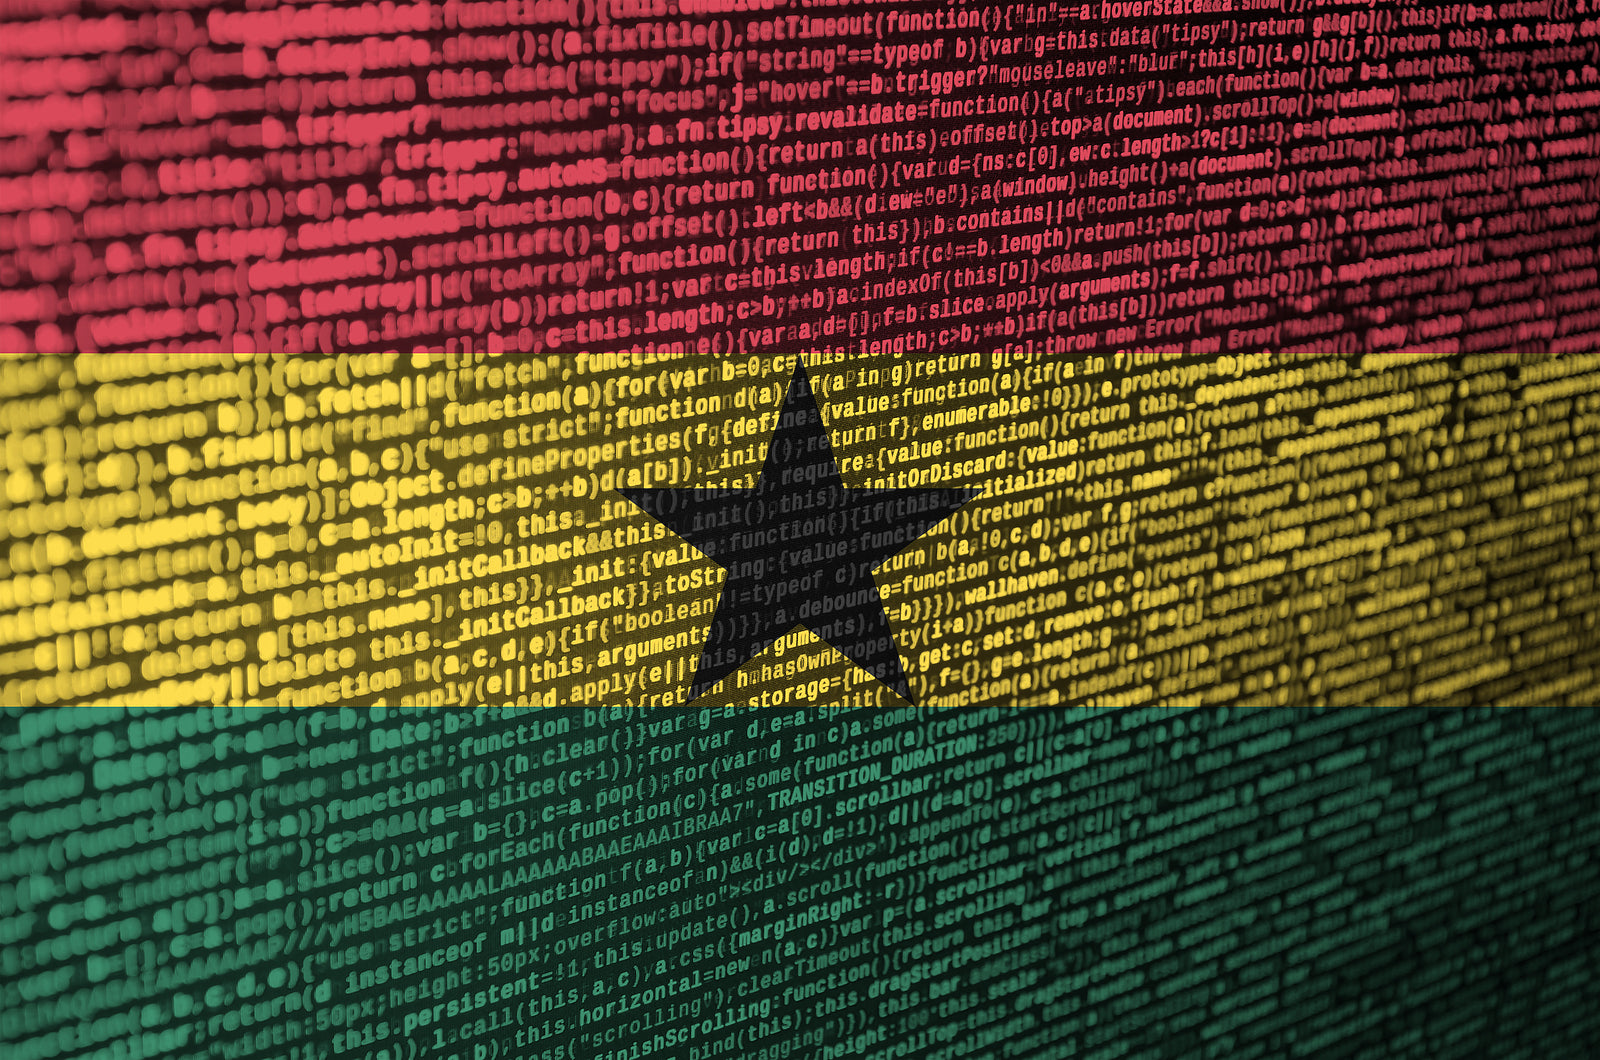 [Ghana] Government fighting corruption with blockchain technology